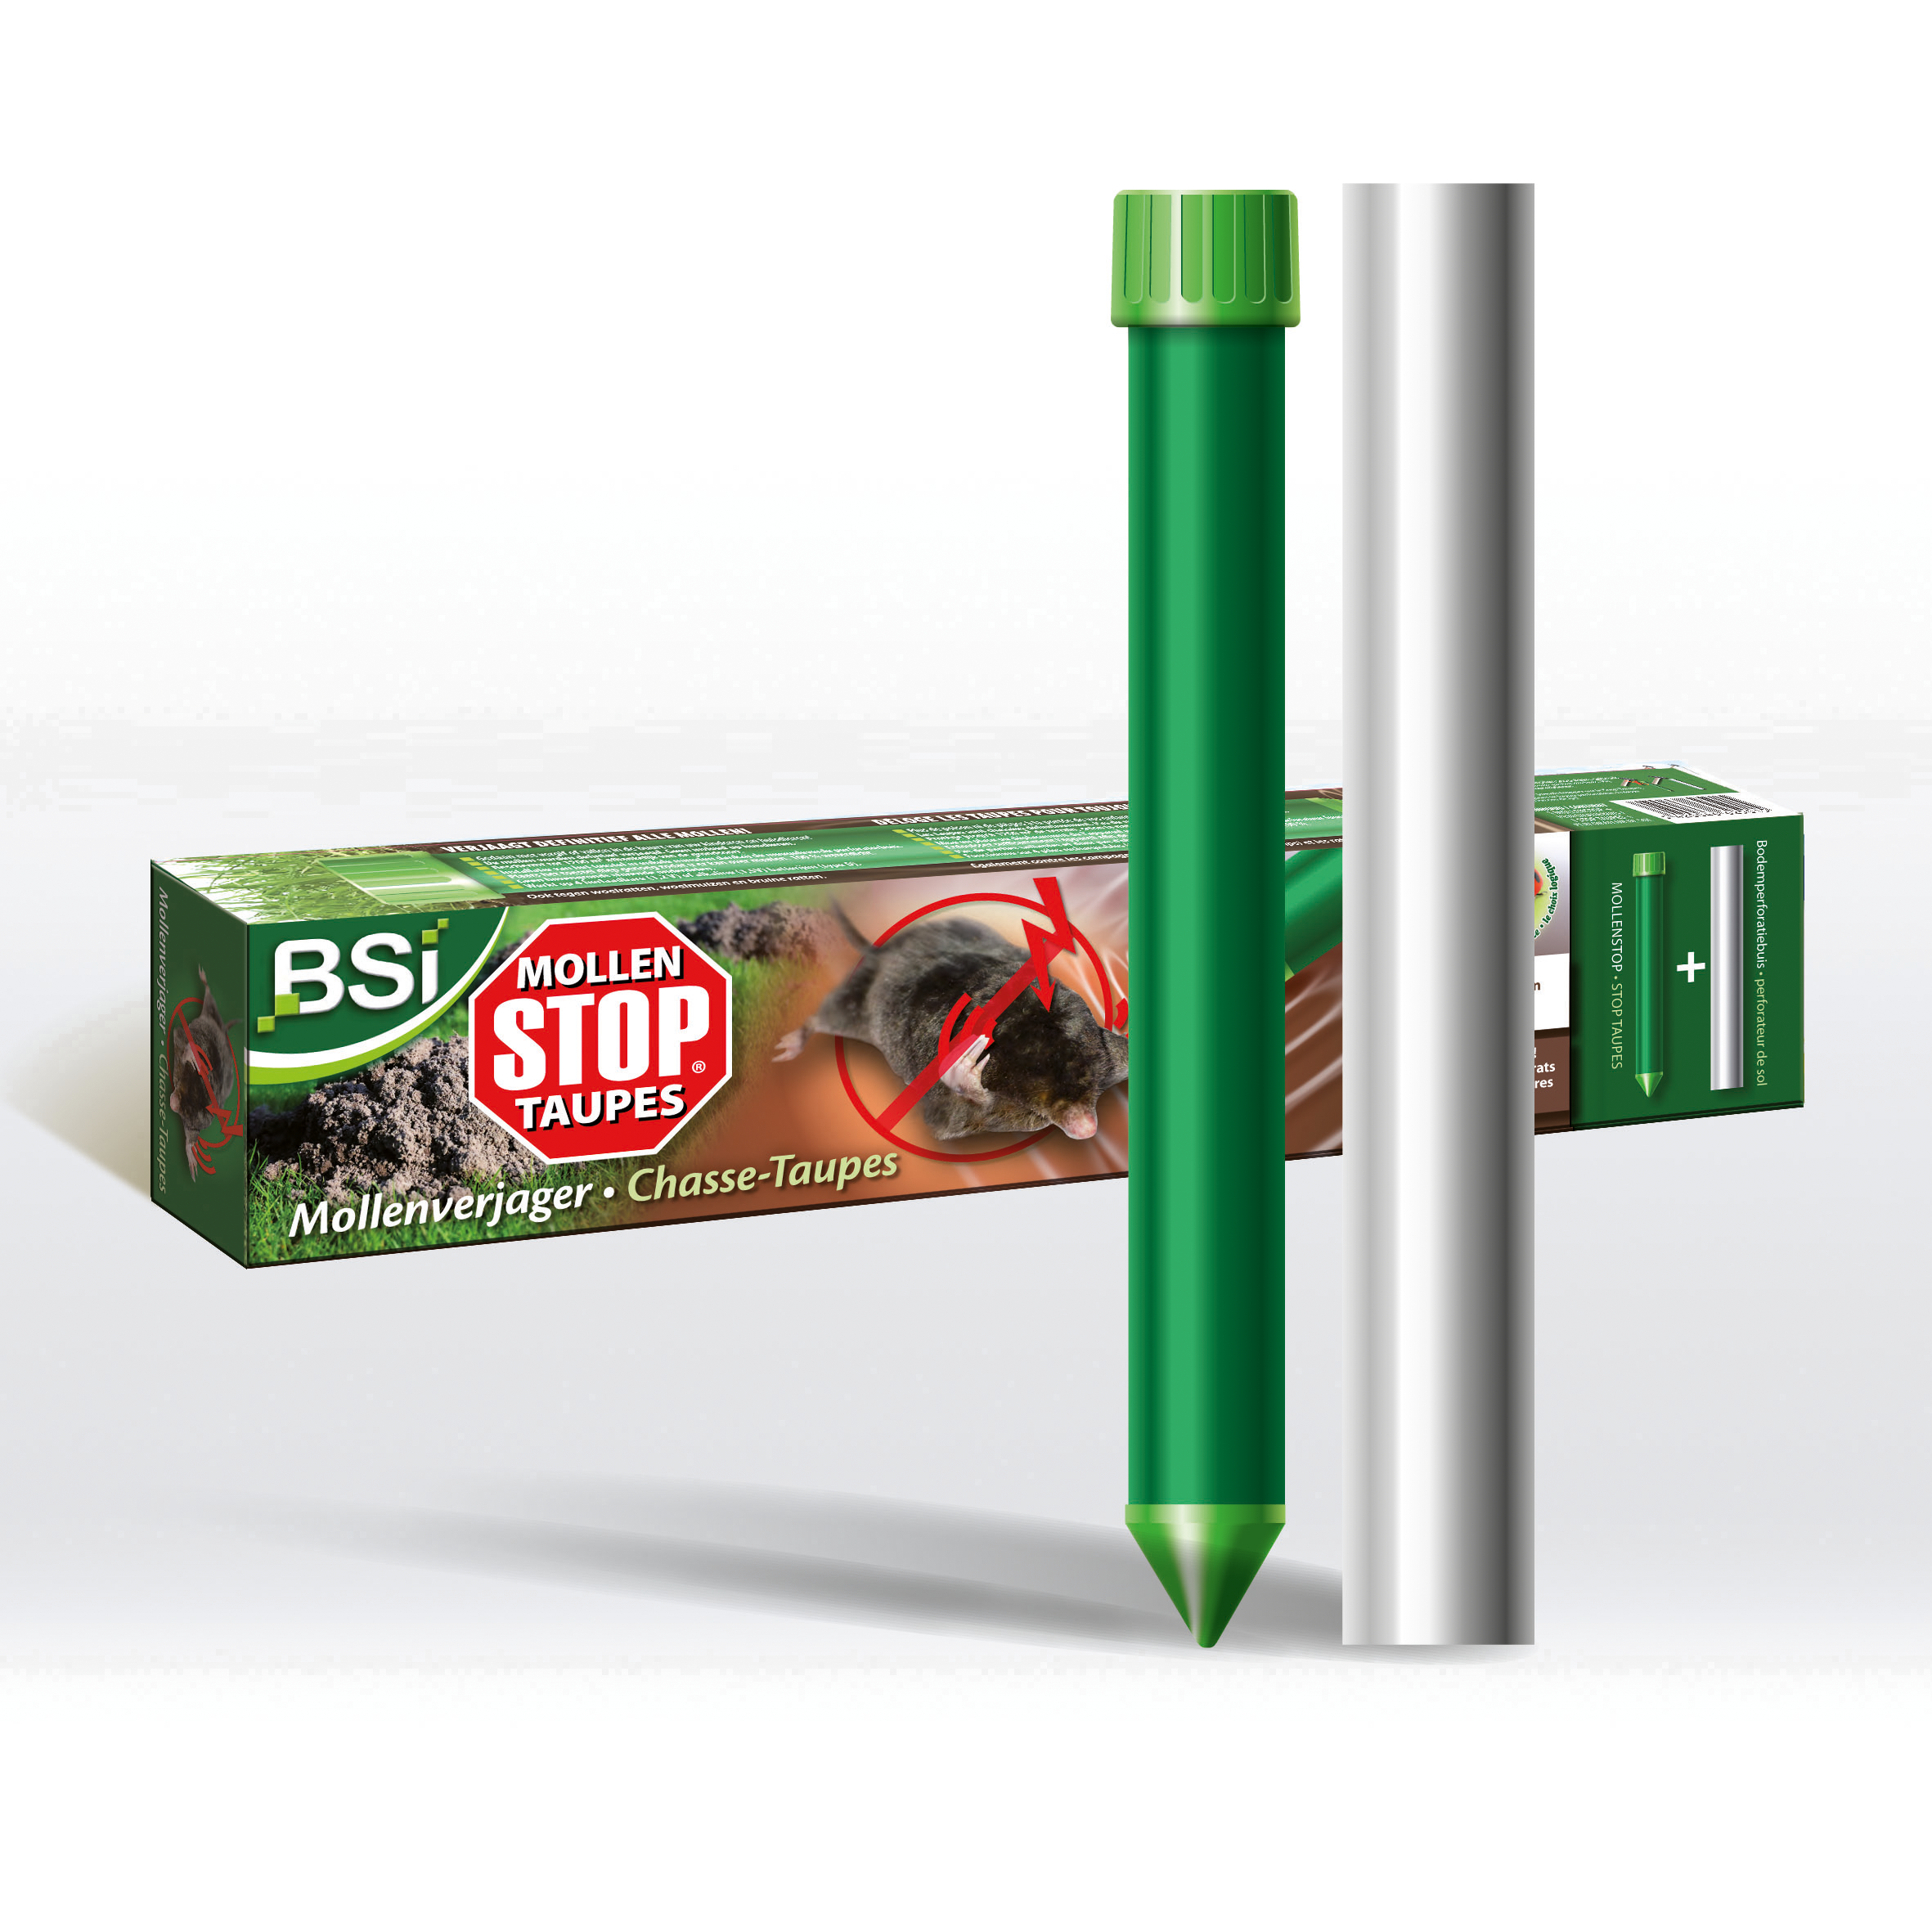 Stop-taupes chasse-taupes image